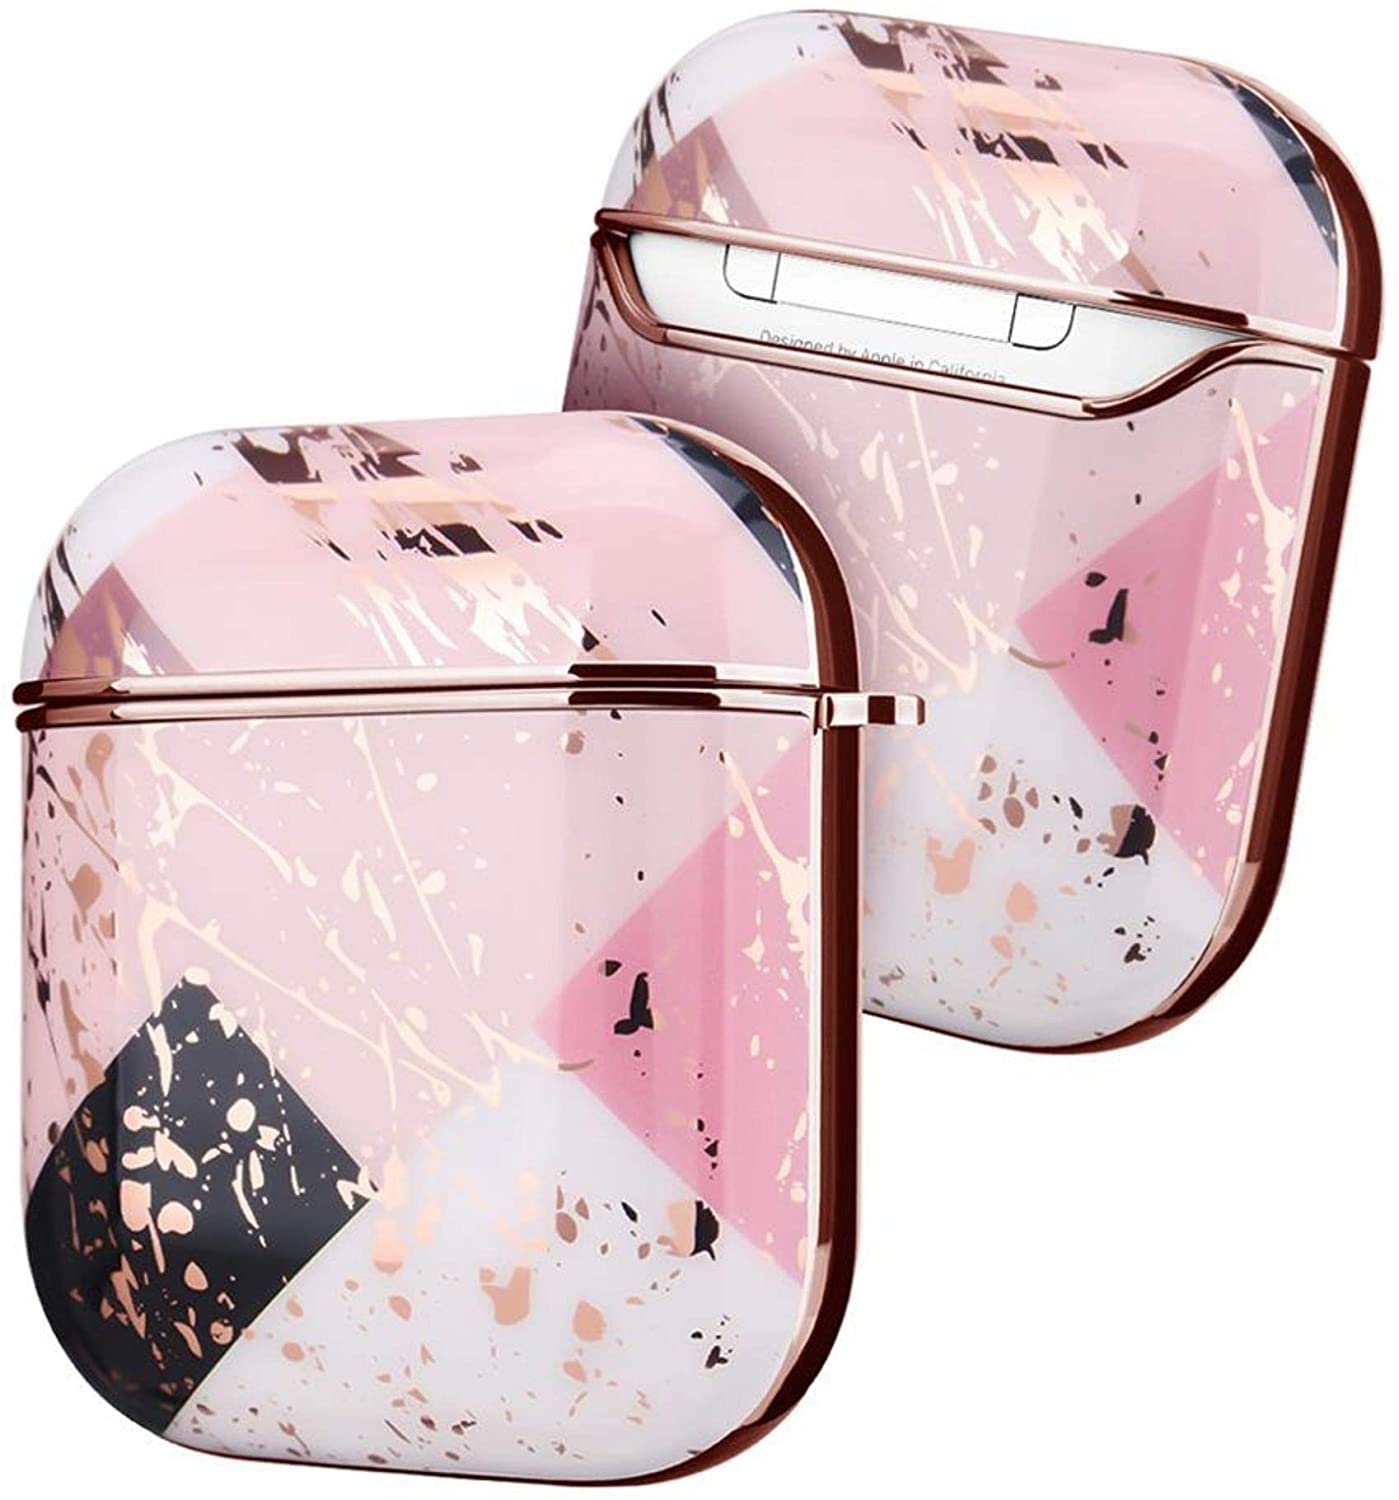 Airpod Case For Apple Airpods Gen 1 & 2 - Electroplated Marble Luxury Design Protective Cover With Clip Keychain - Supports Wireless Qi Charging For Airpods Generation 1 & 2 - Picasso Pink Marble